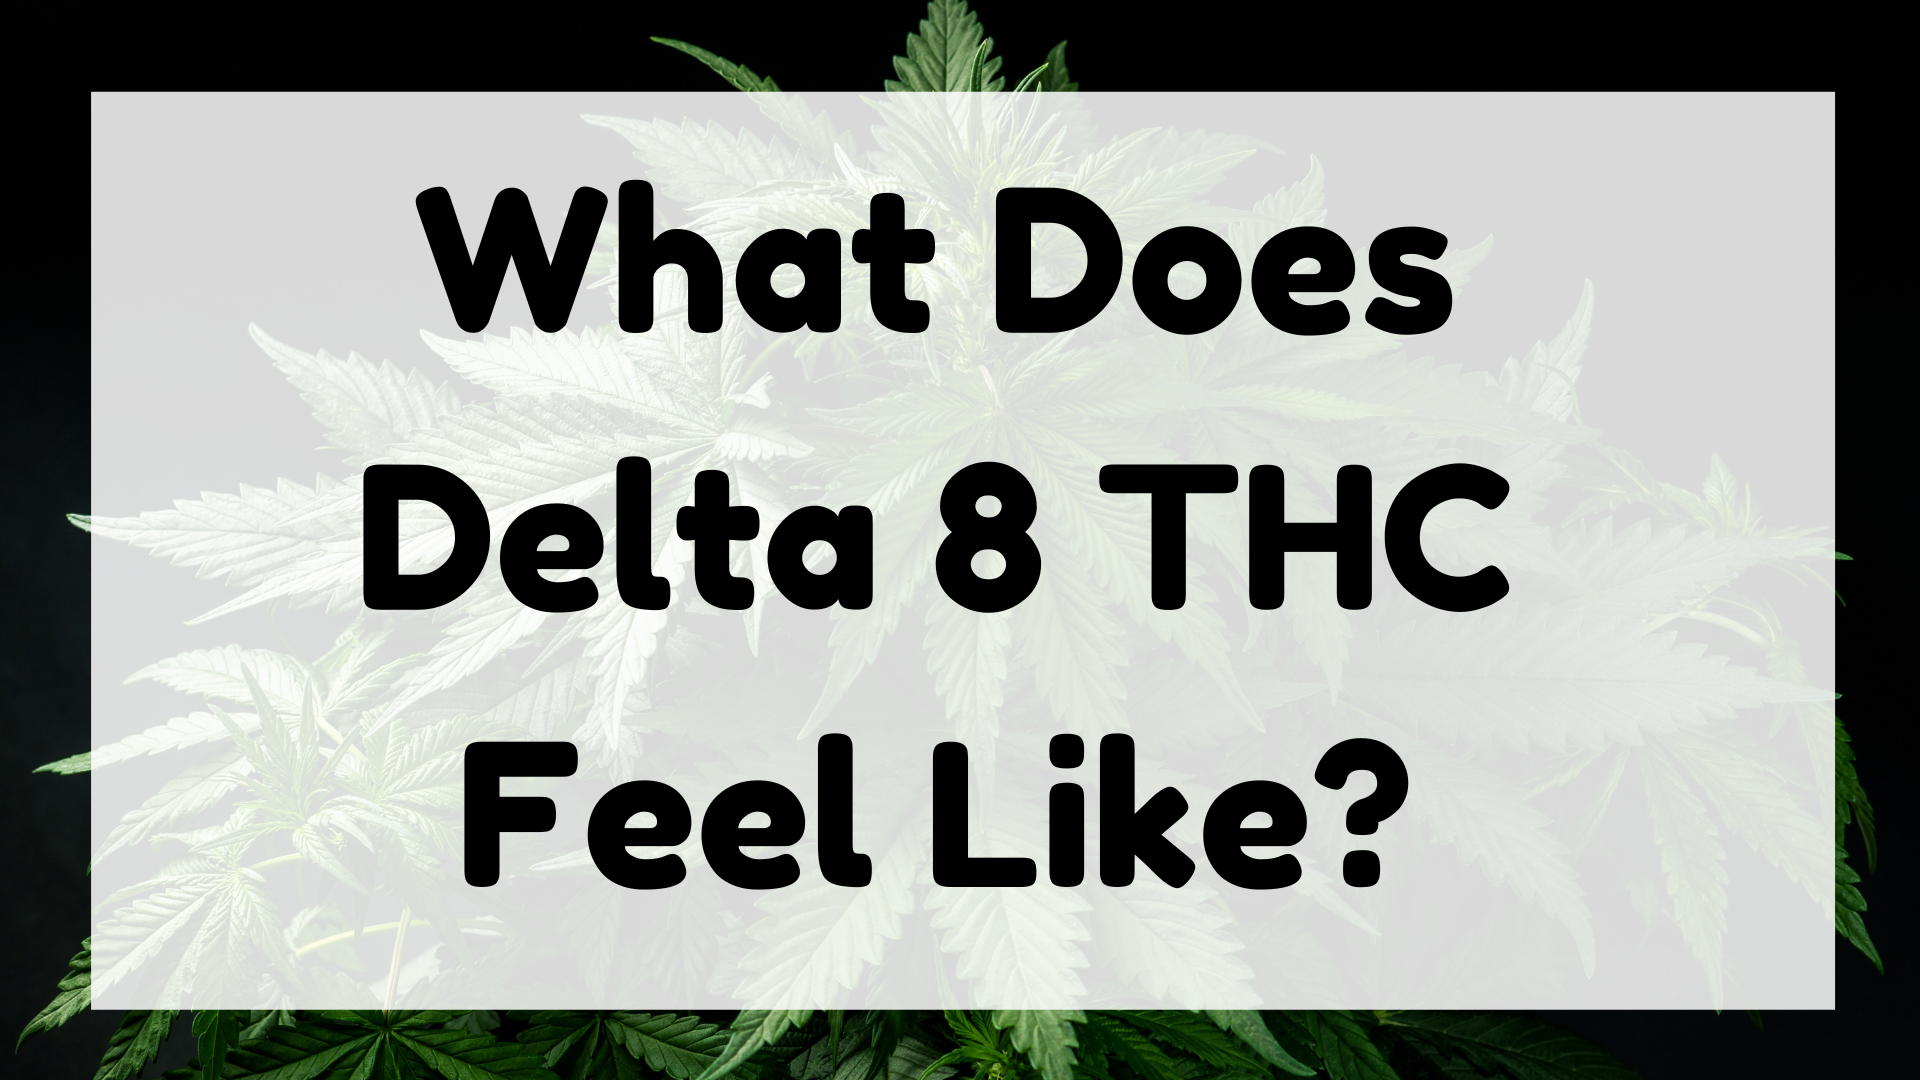 What does delta 8 THC feel like featured image